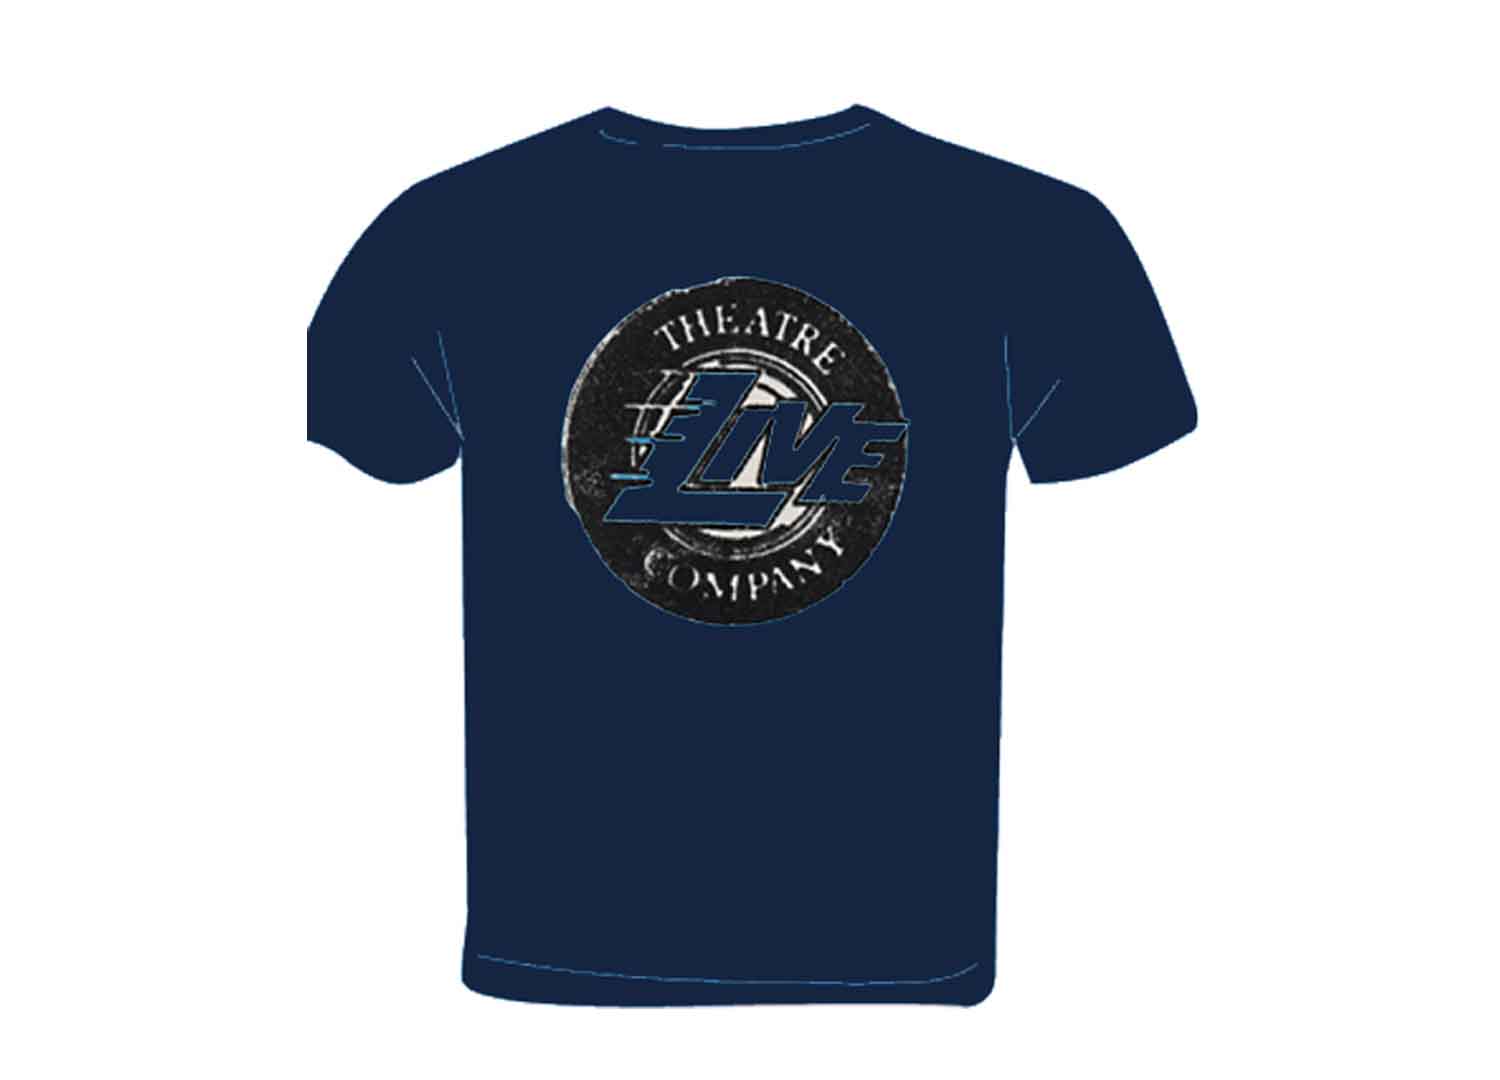 Picture of navy T-shirt with logo in white & black on it